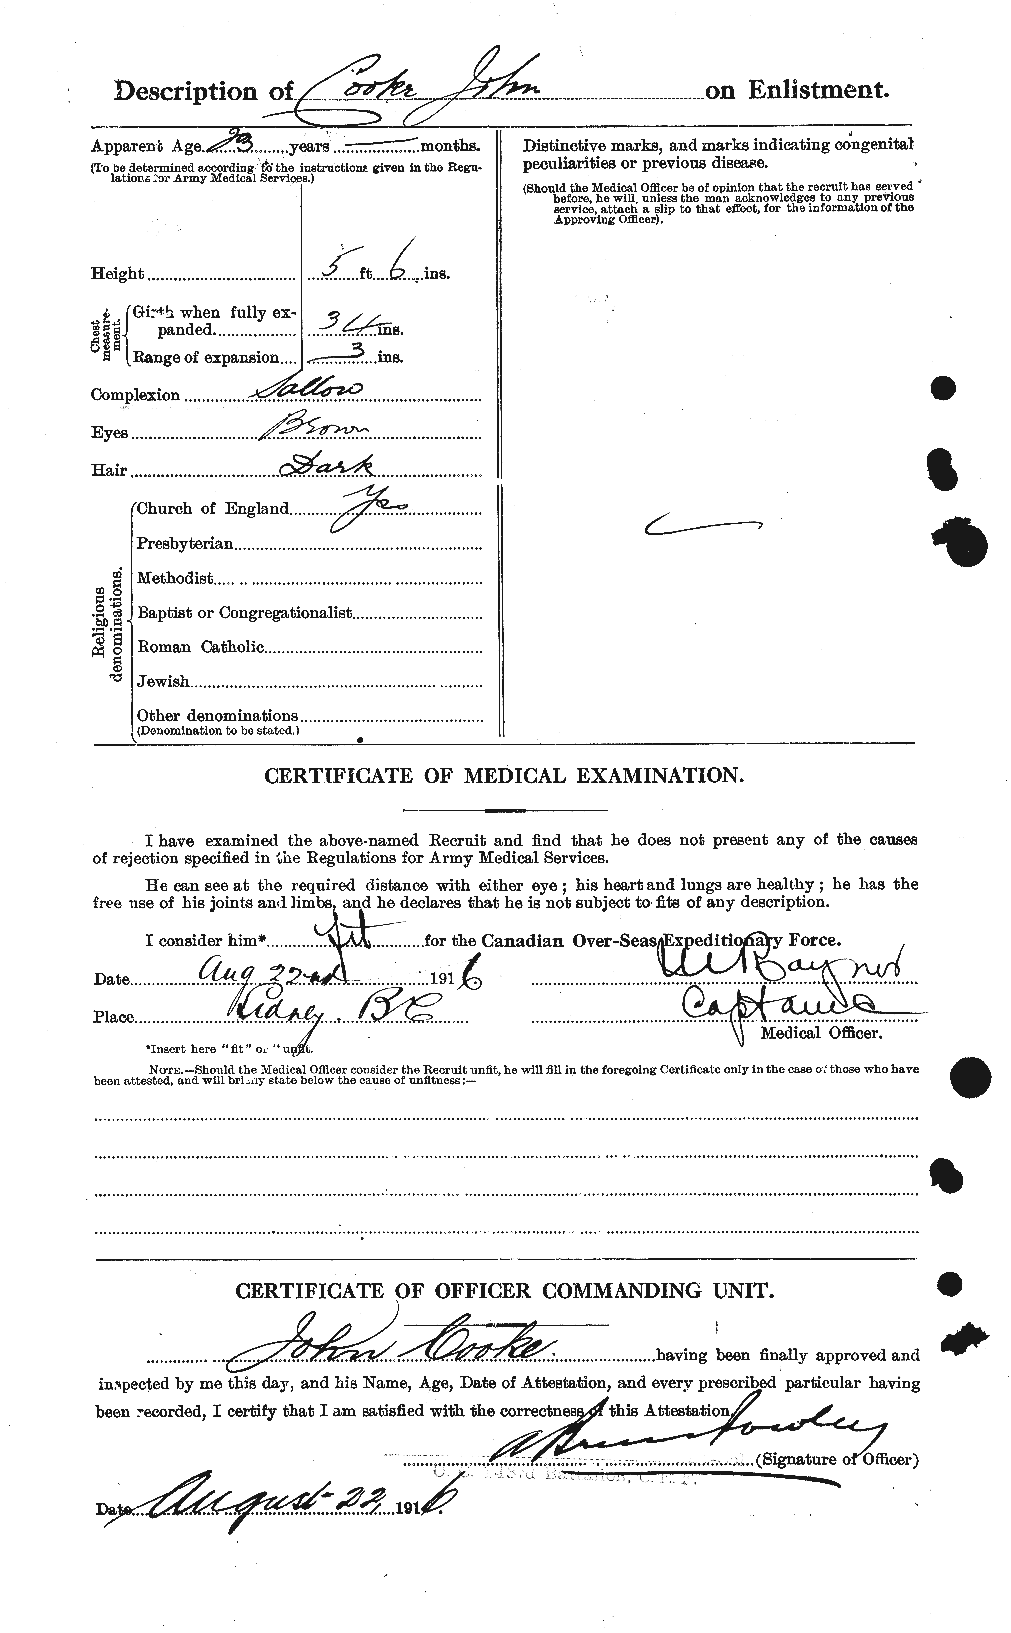 Personnel Records of the First World War - CEF 075947b